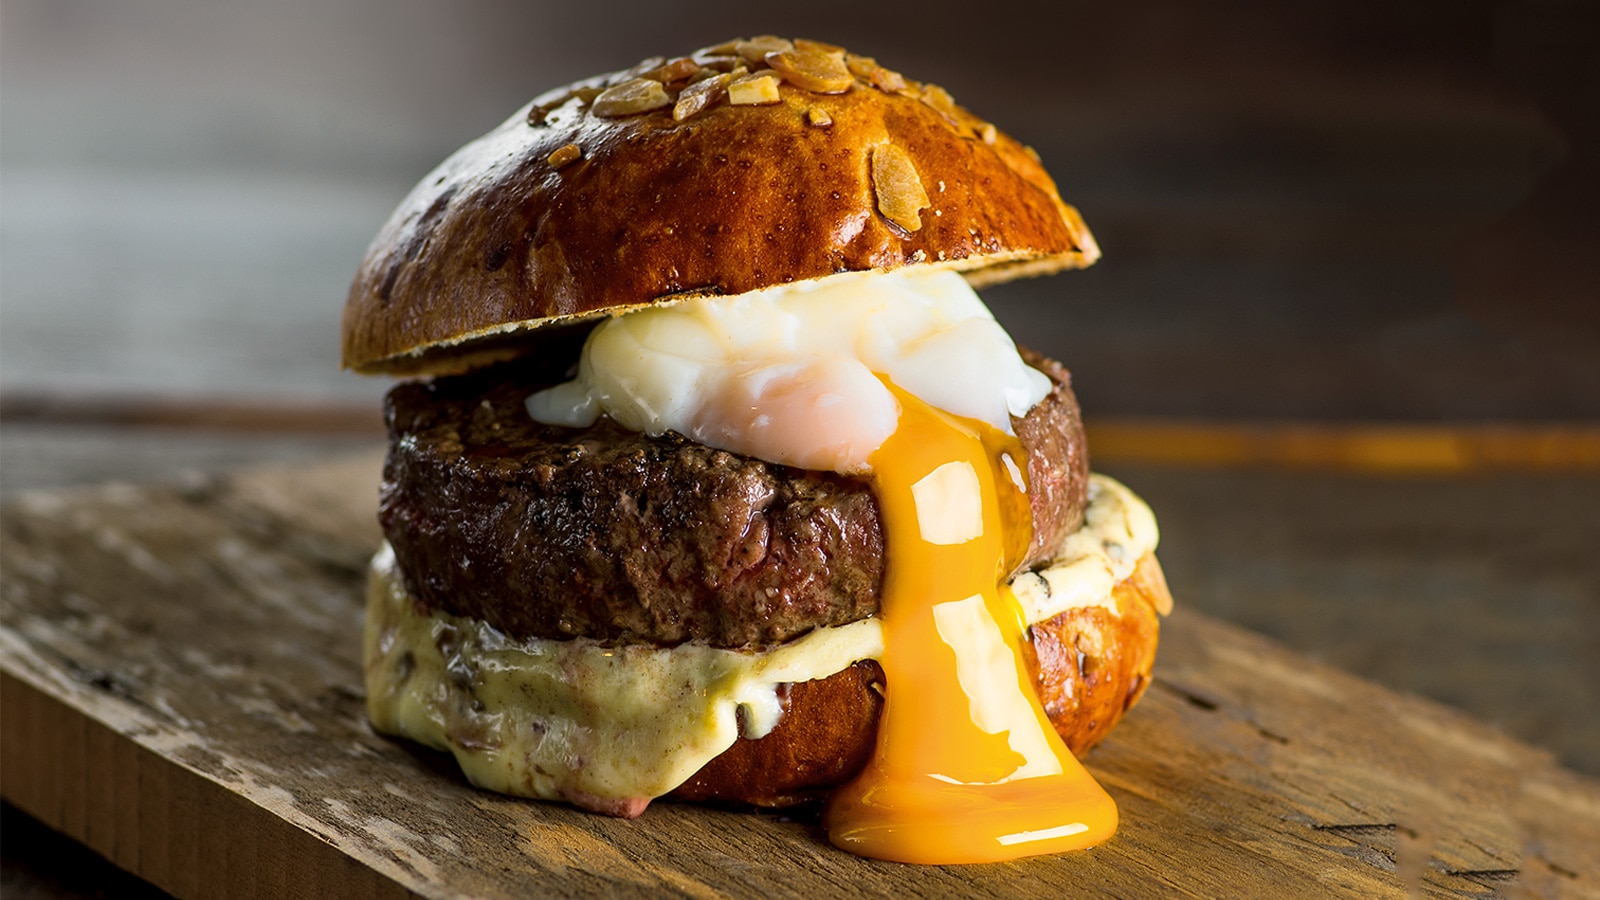 The Best Burgers In The World | The Journal | MR PORTER